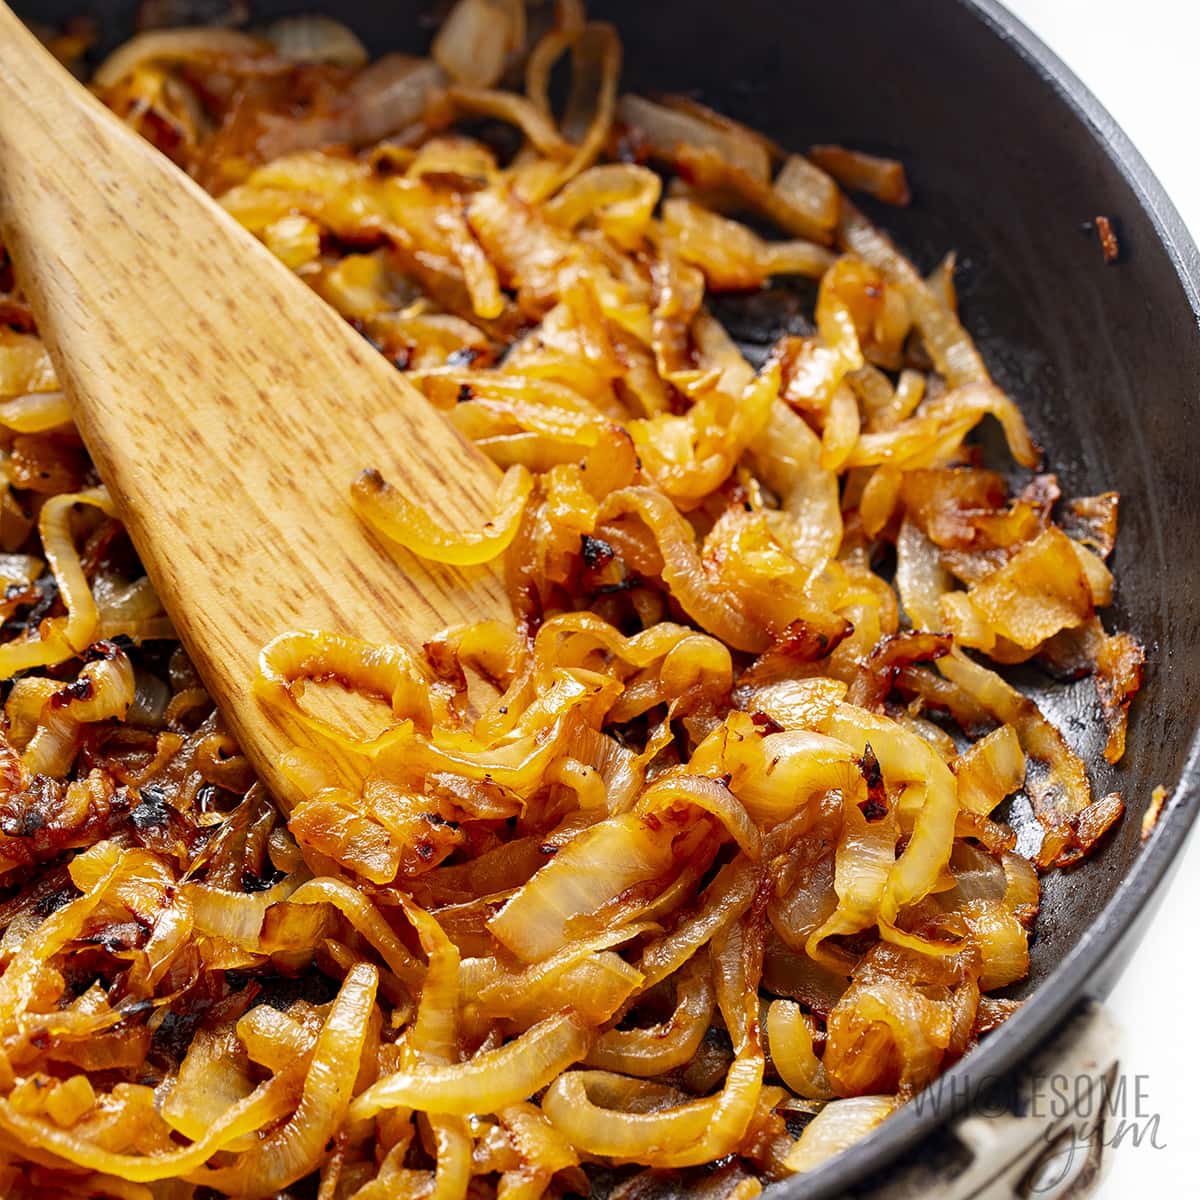 Caramelized onions in skillet.